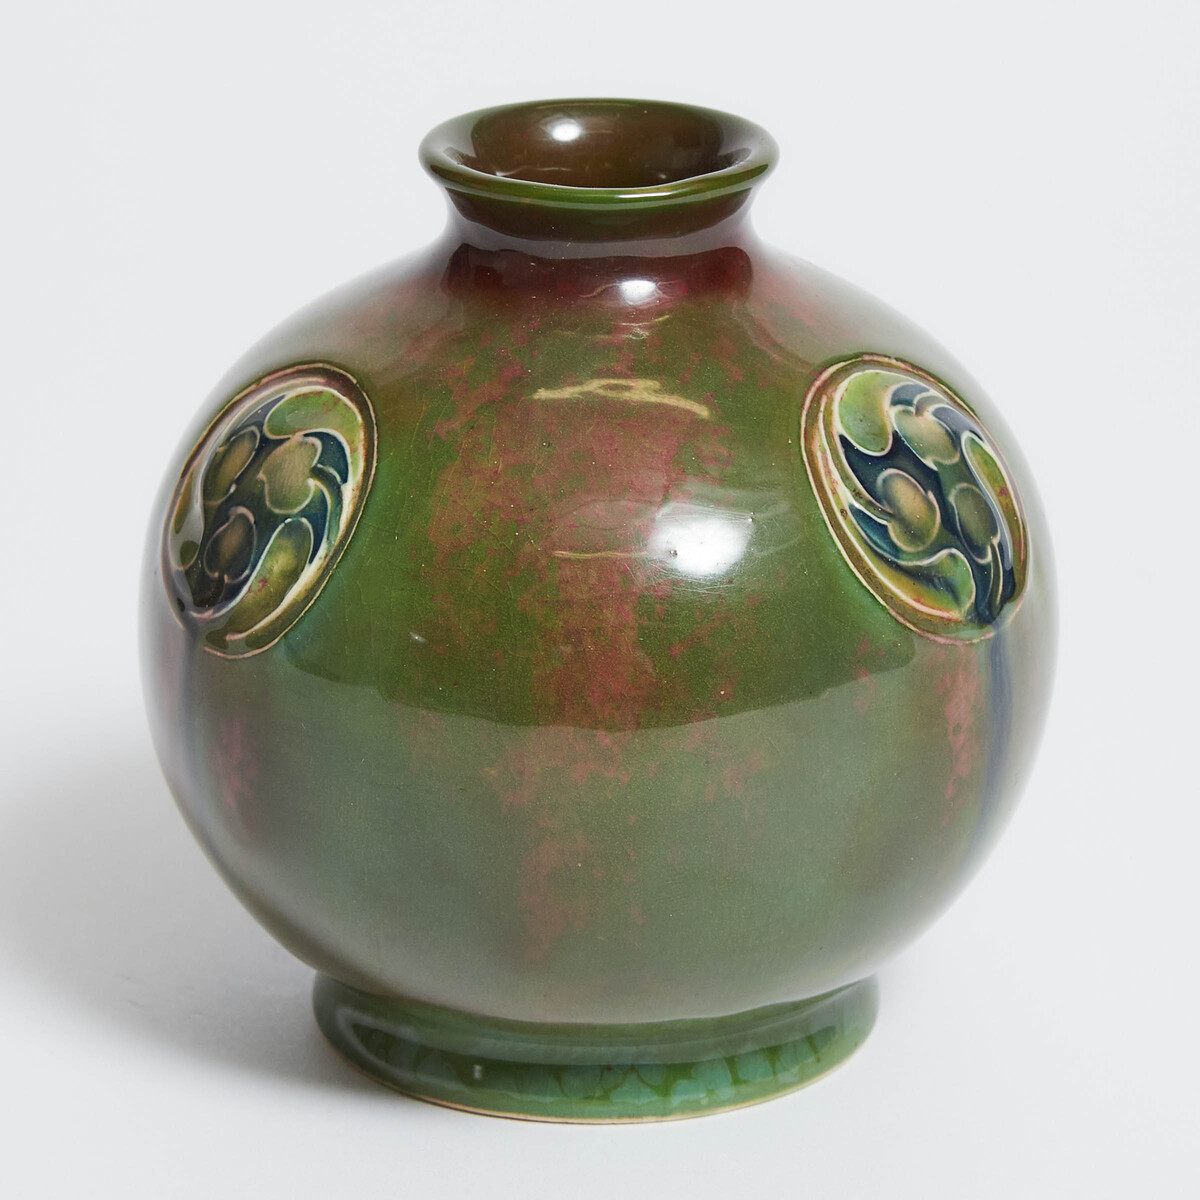 Macintyre Moorcroft Small Mottled Green Flamminian Vase, for Liberty & Co., c.1906-13, height 4 in — - Image 2 of 3